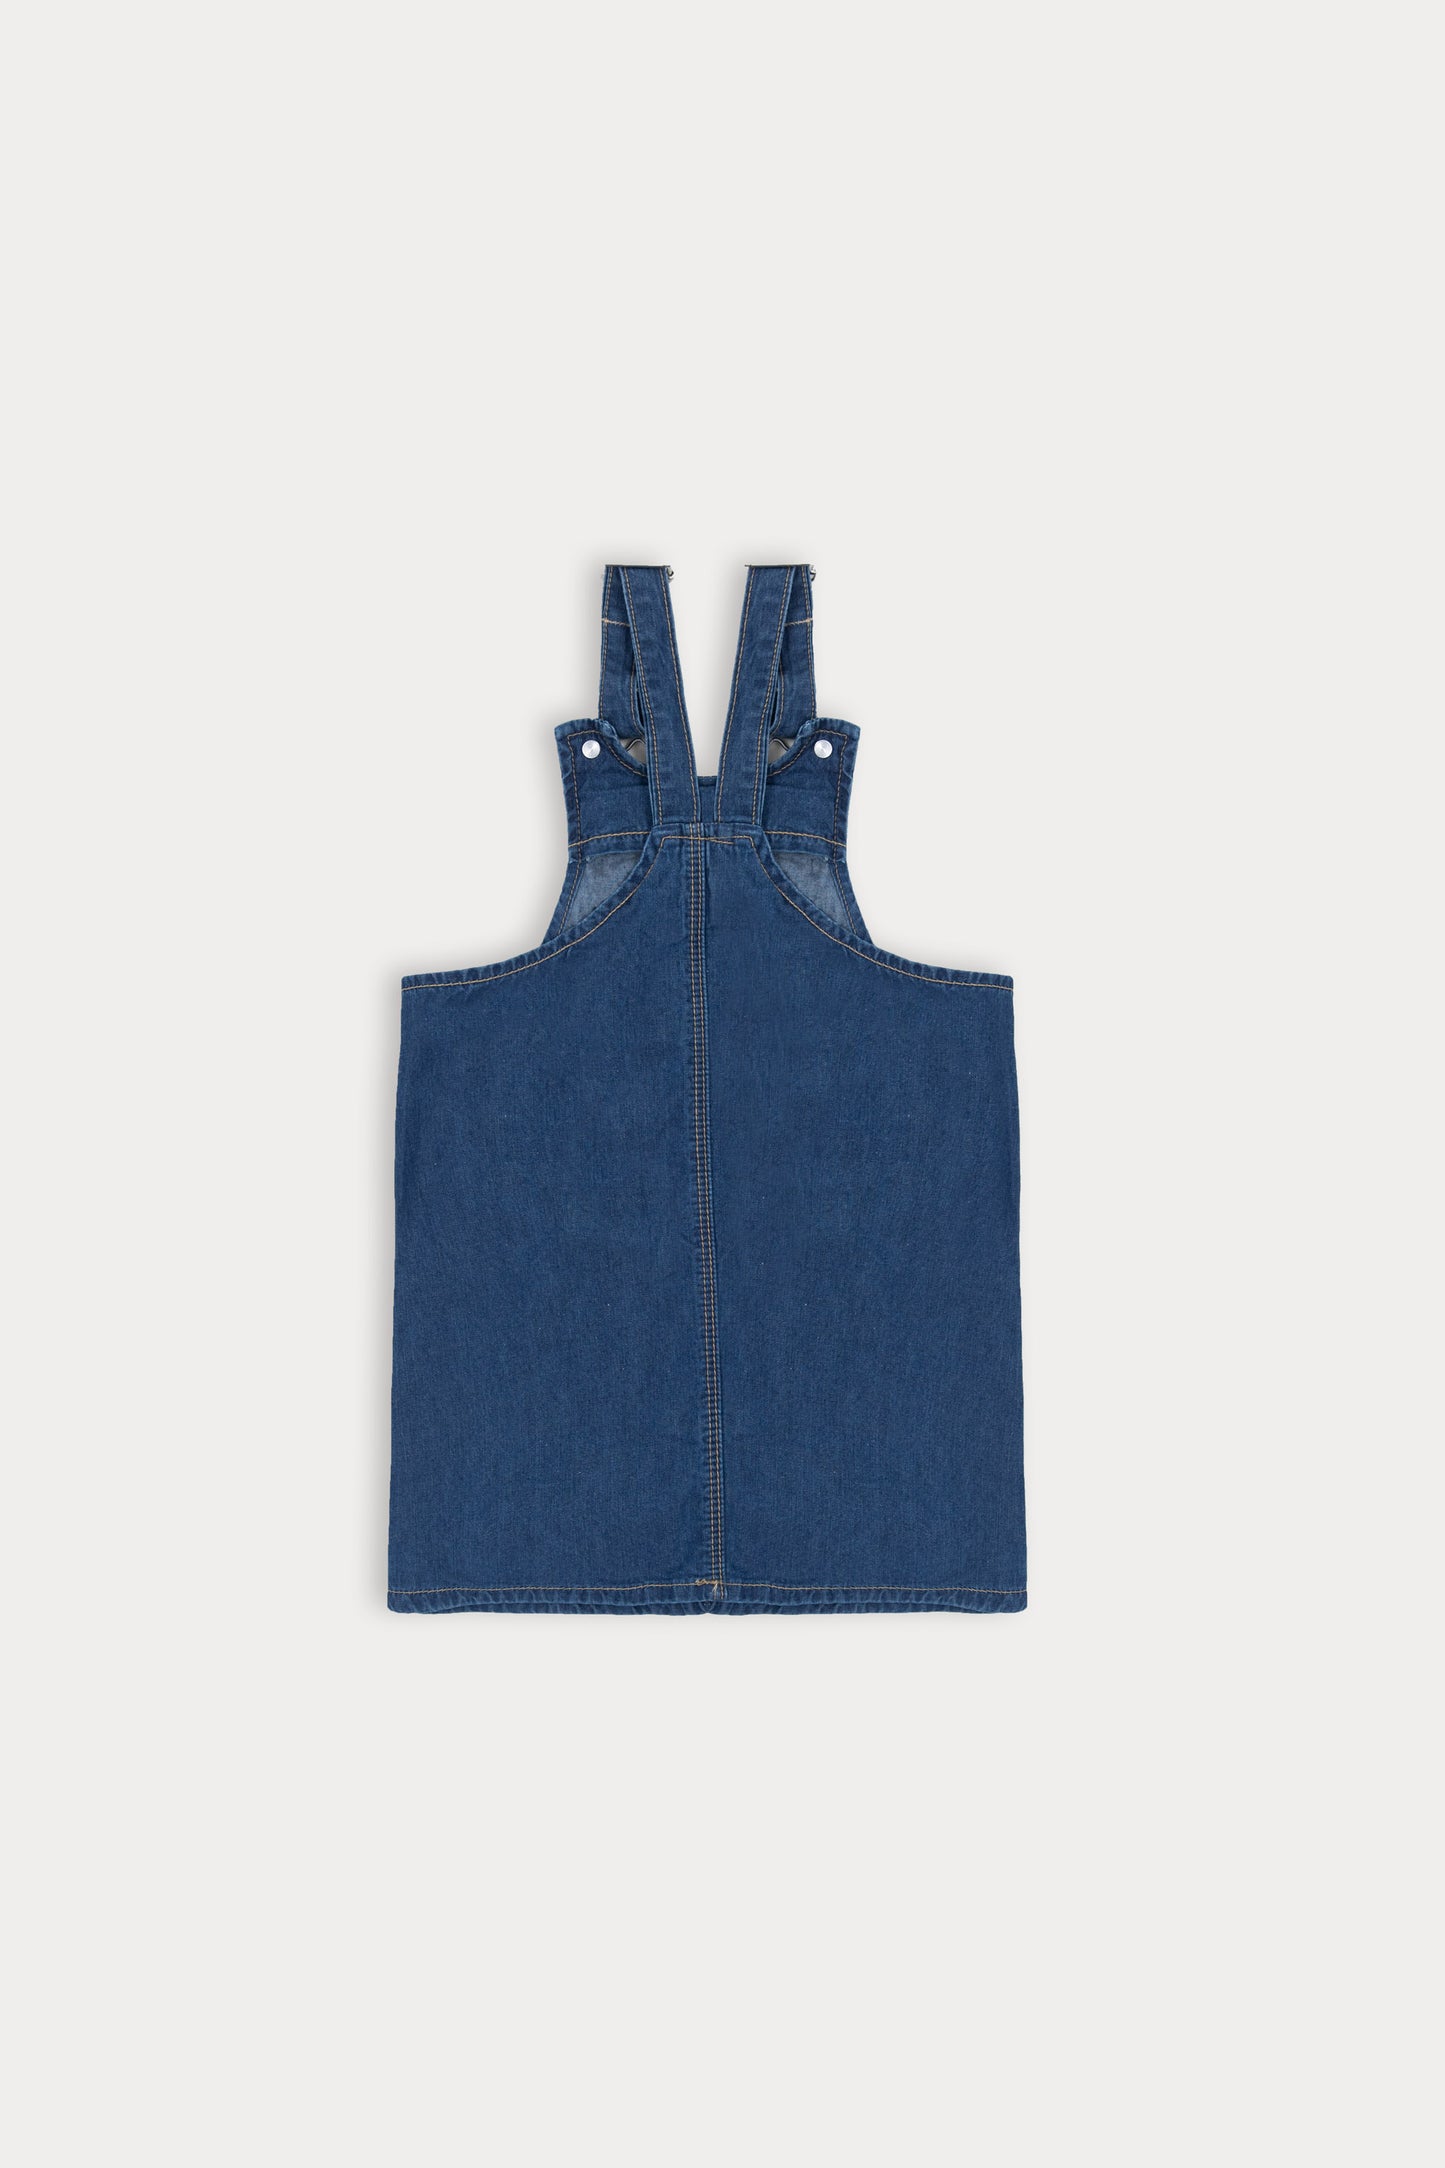 NUTMEG Blue Denim Pinafore Dress Dungaree Front Pockets Relaxed Fit